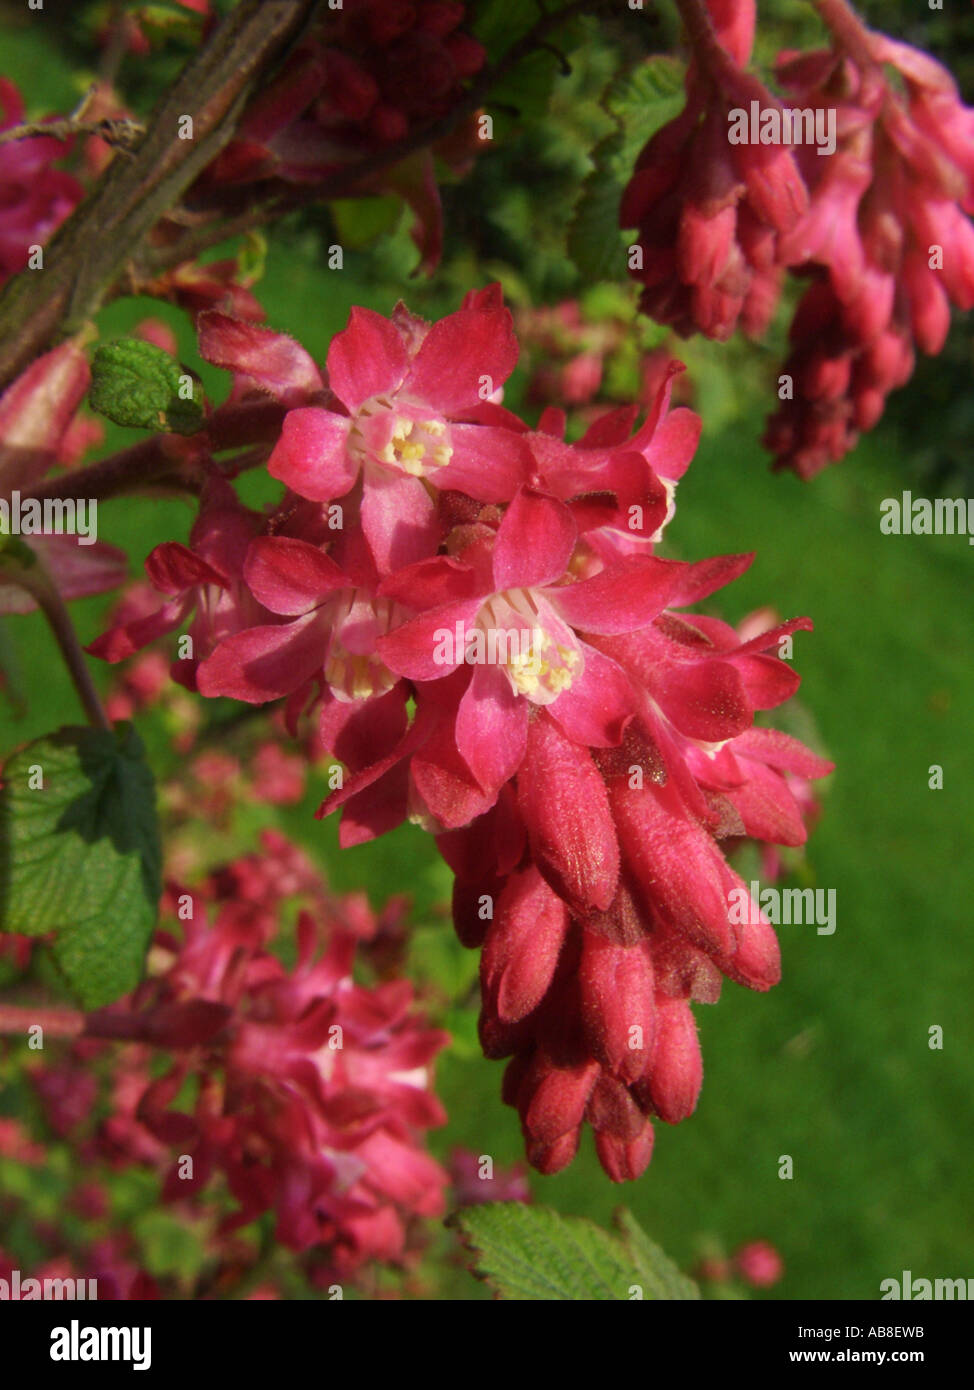 blood currant, red-flower currant, red-flowering currant (Ribes sanguineum), inflorescence Stock Photo